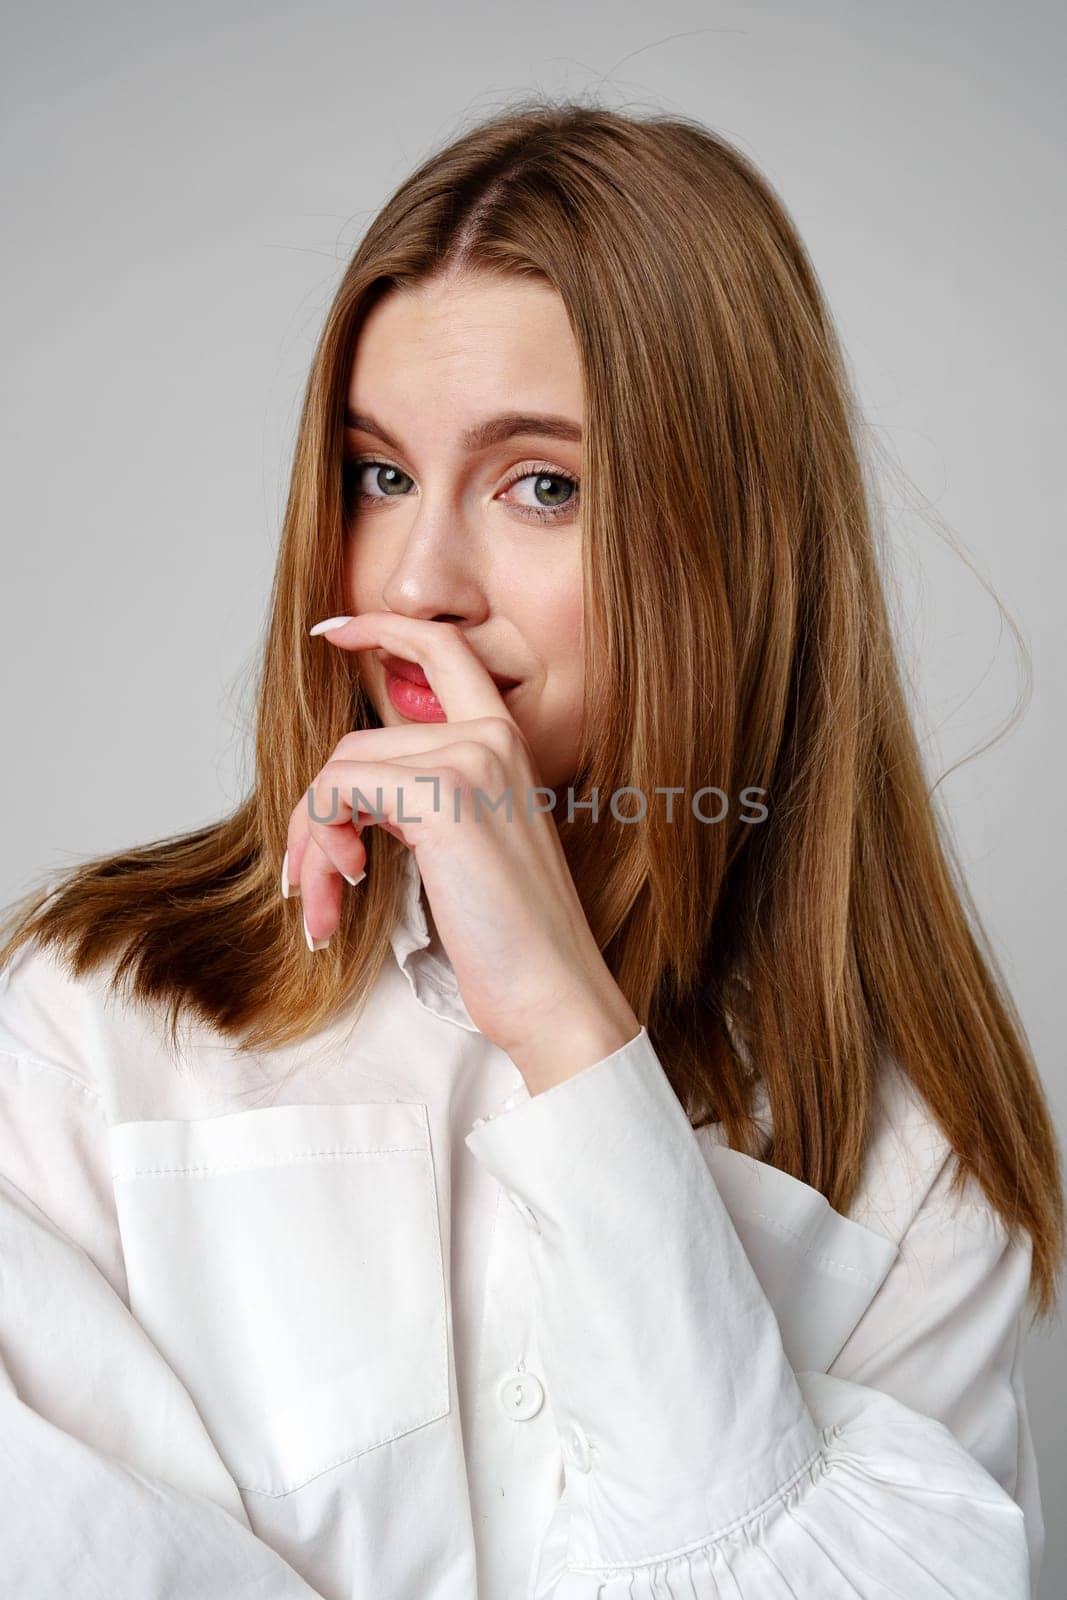 Concerned Young Woman deep in thought or contemplation on gray background